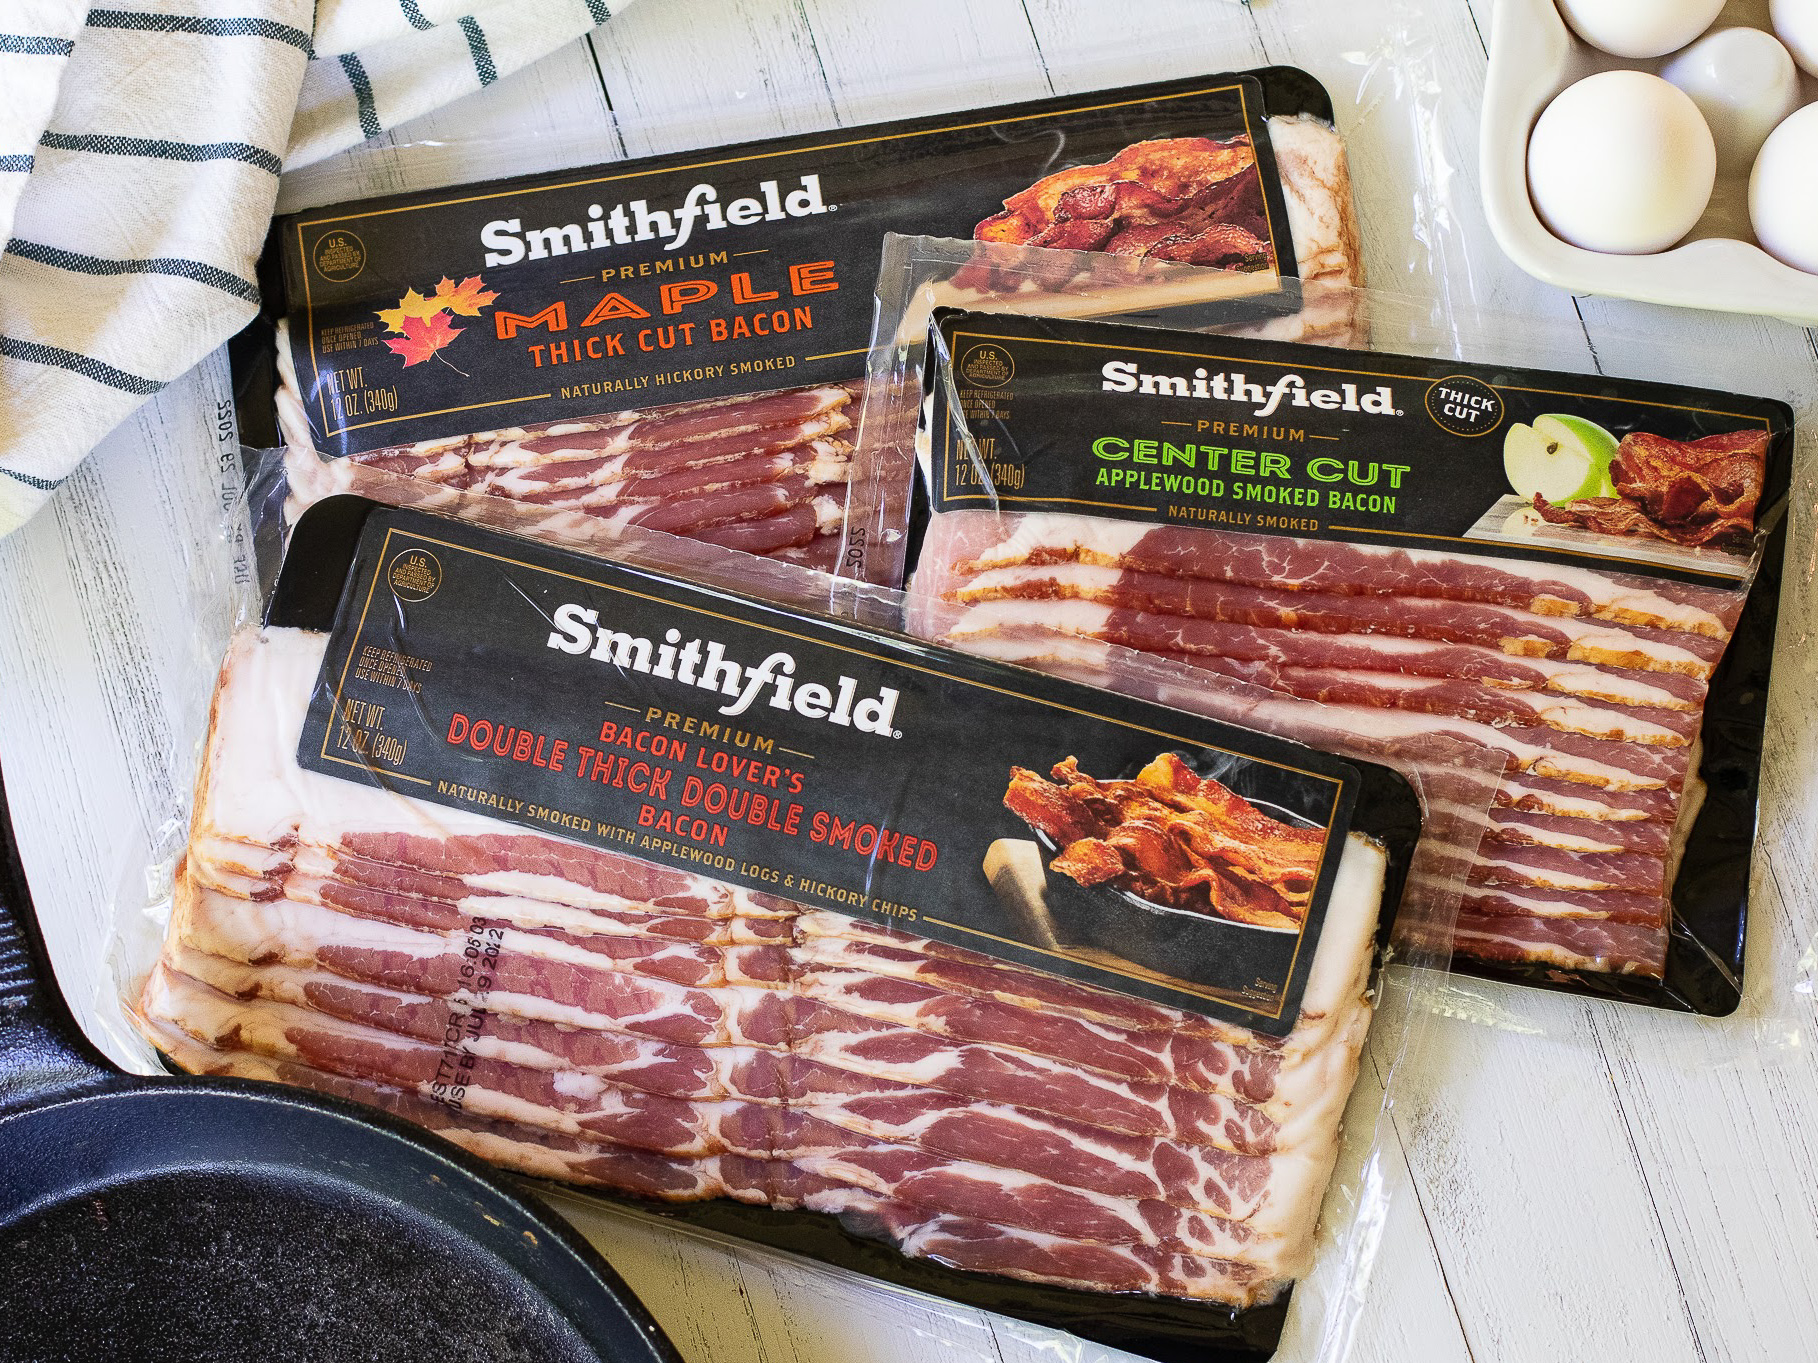 Load Your Cart With Delicious Smithfield Bacon – On Sale NOW At Publix